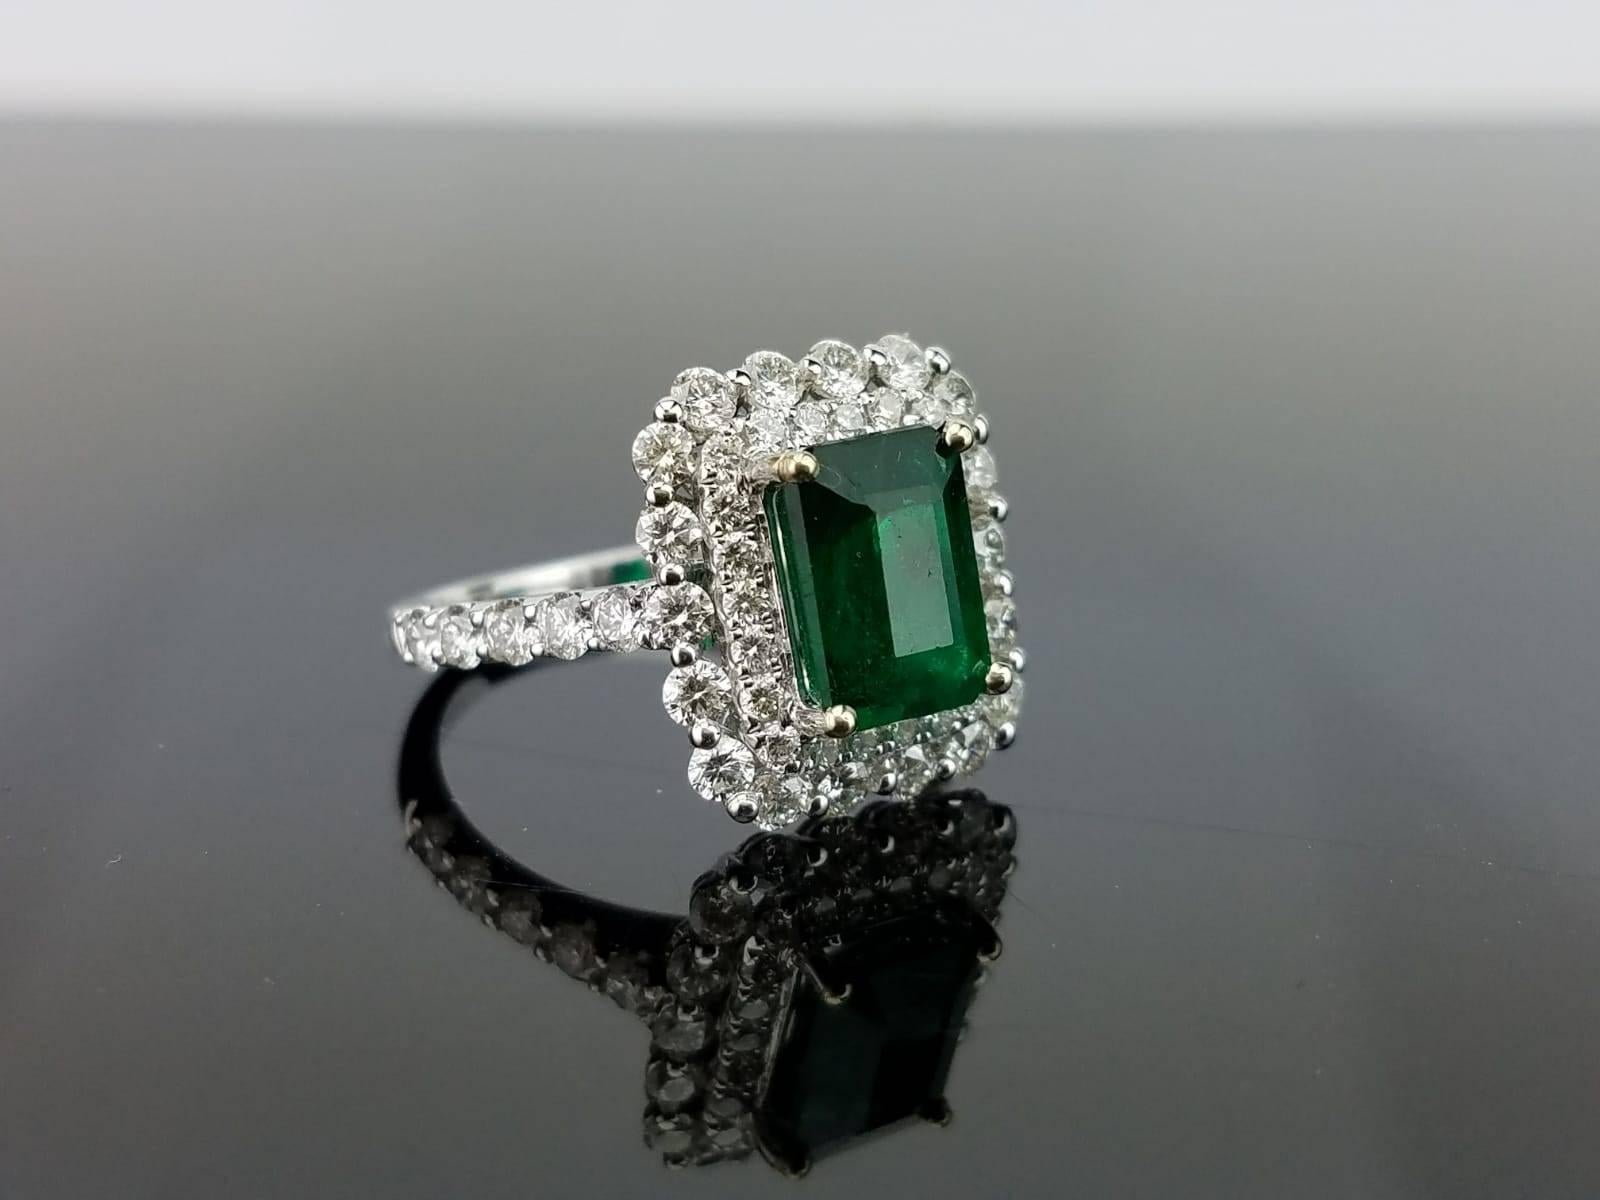 A stunning, transparent Zambian Emerald with a great deep green colour and lustre and no apparent inclusions, adorned with White Diamonds, all set in 18K white gold. 

Stone Details: 
Stone:  Zambian Emerald
Carat Weight: 2.02 carats

Diamond